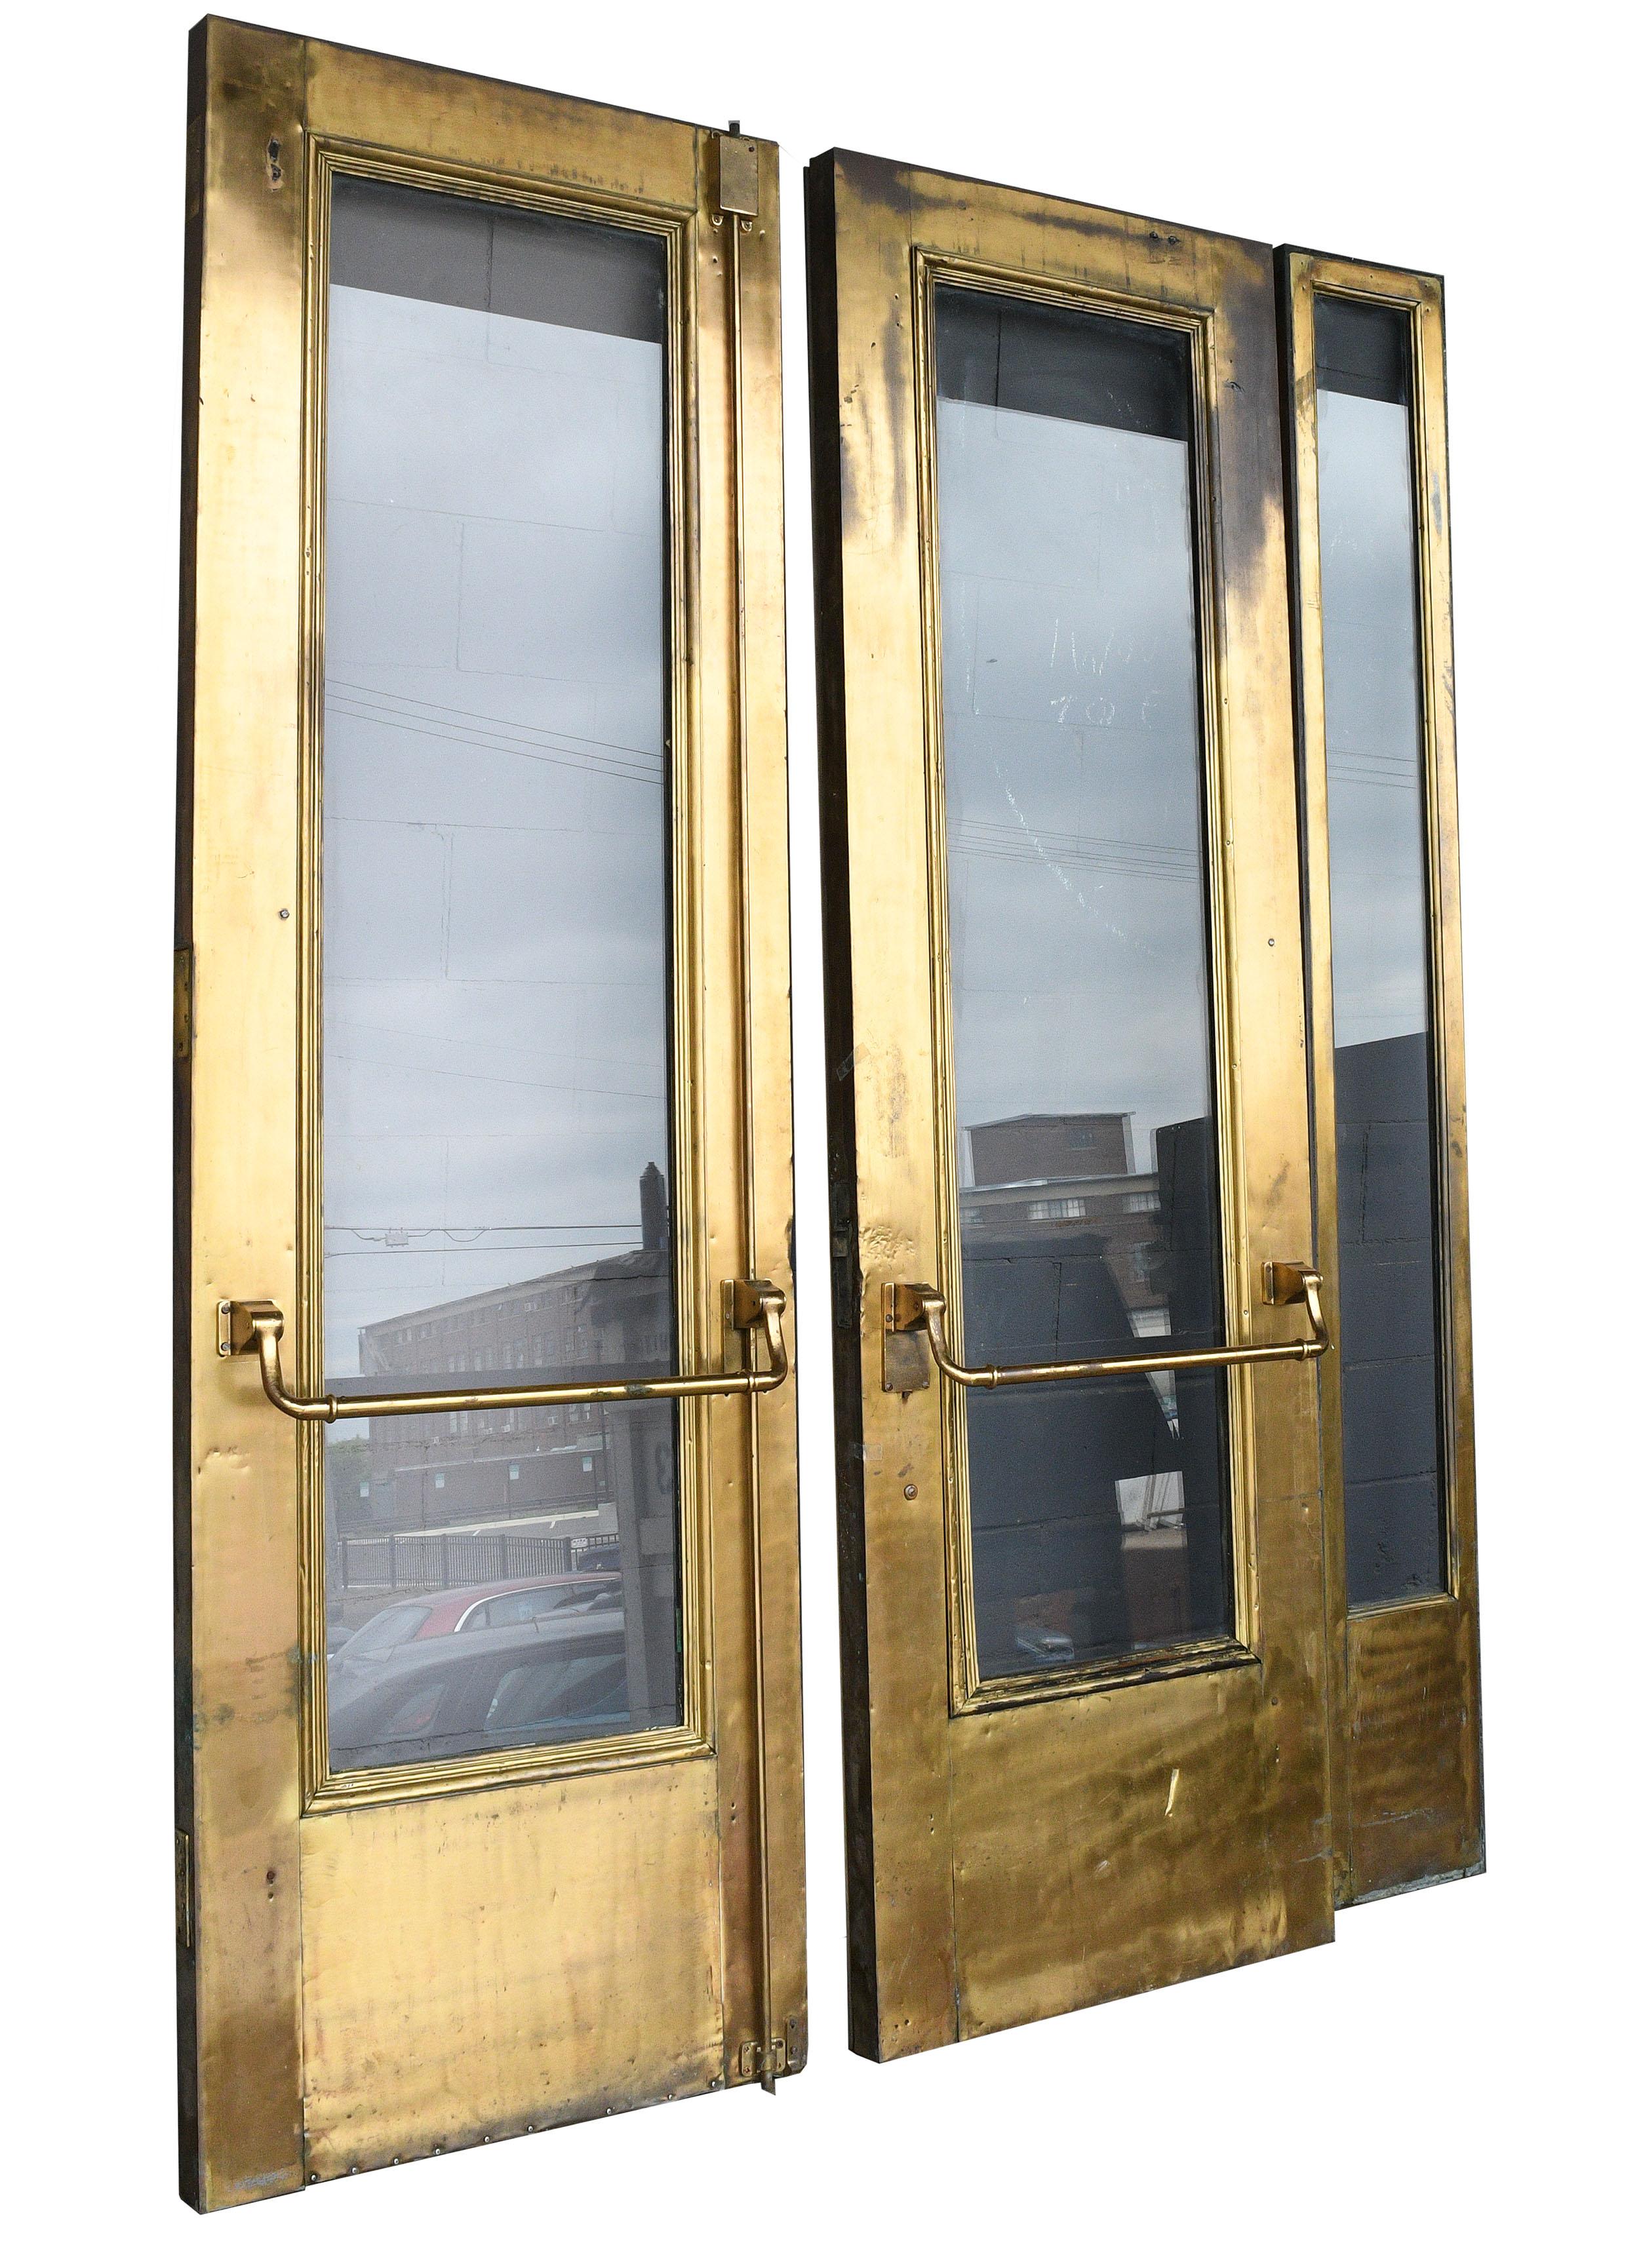 exterior door with sidelights and transom